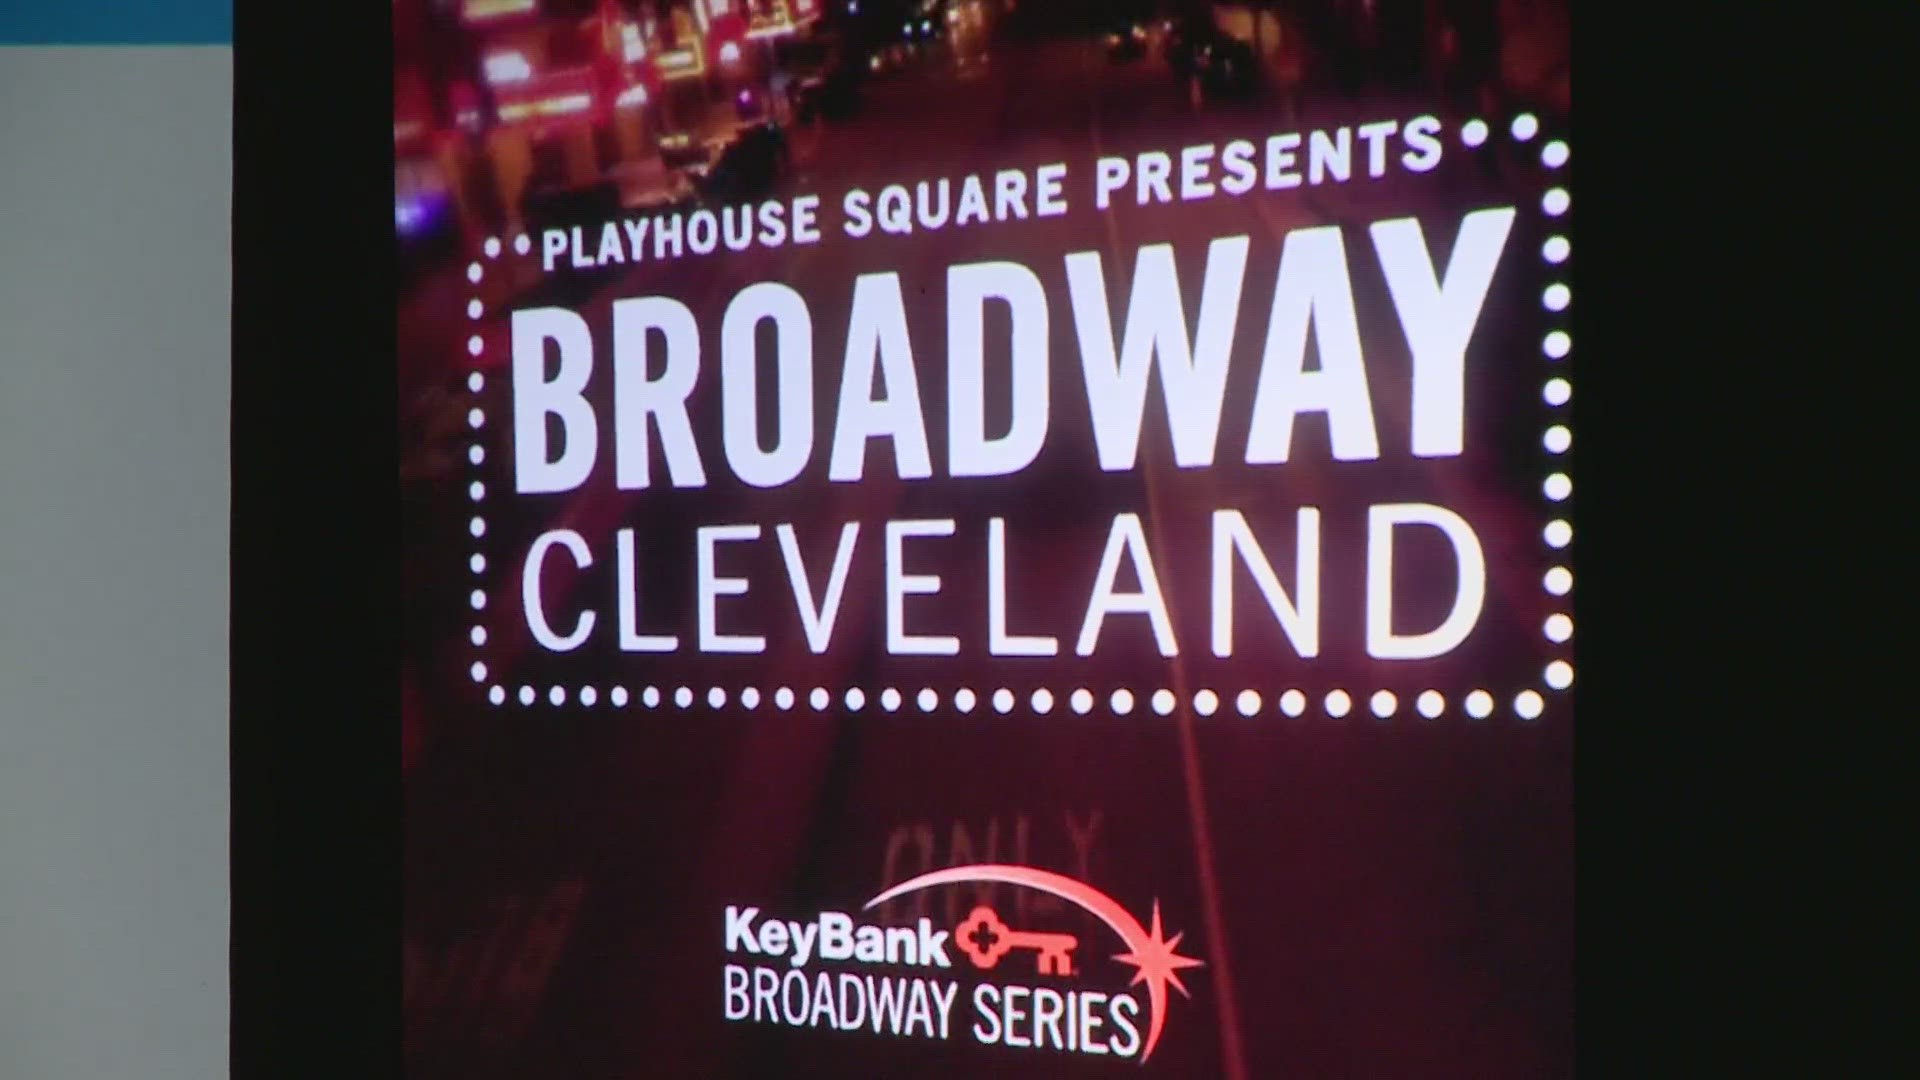 Playhouse Square officials revealed the full lineup Tuesday night.